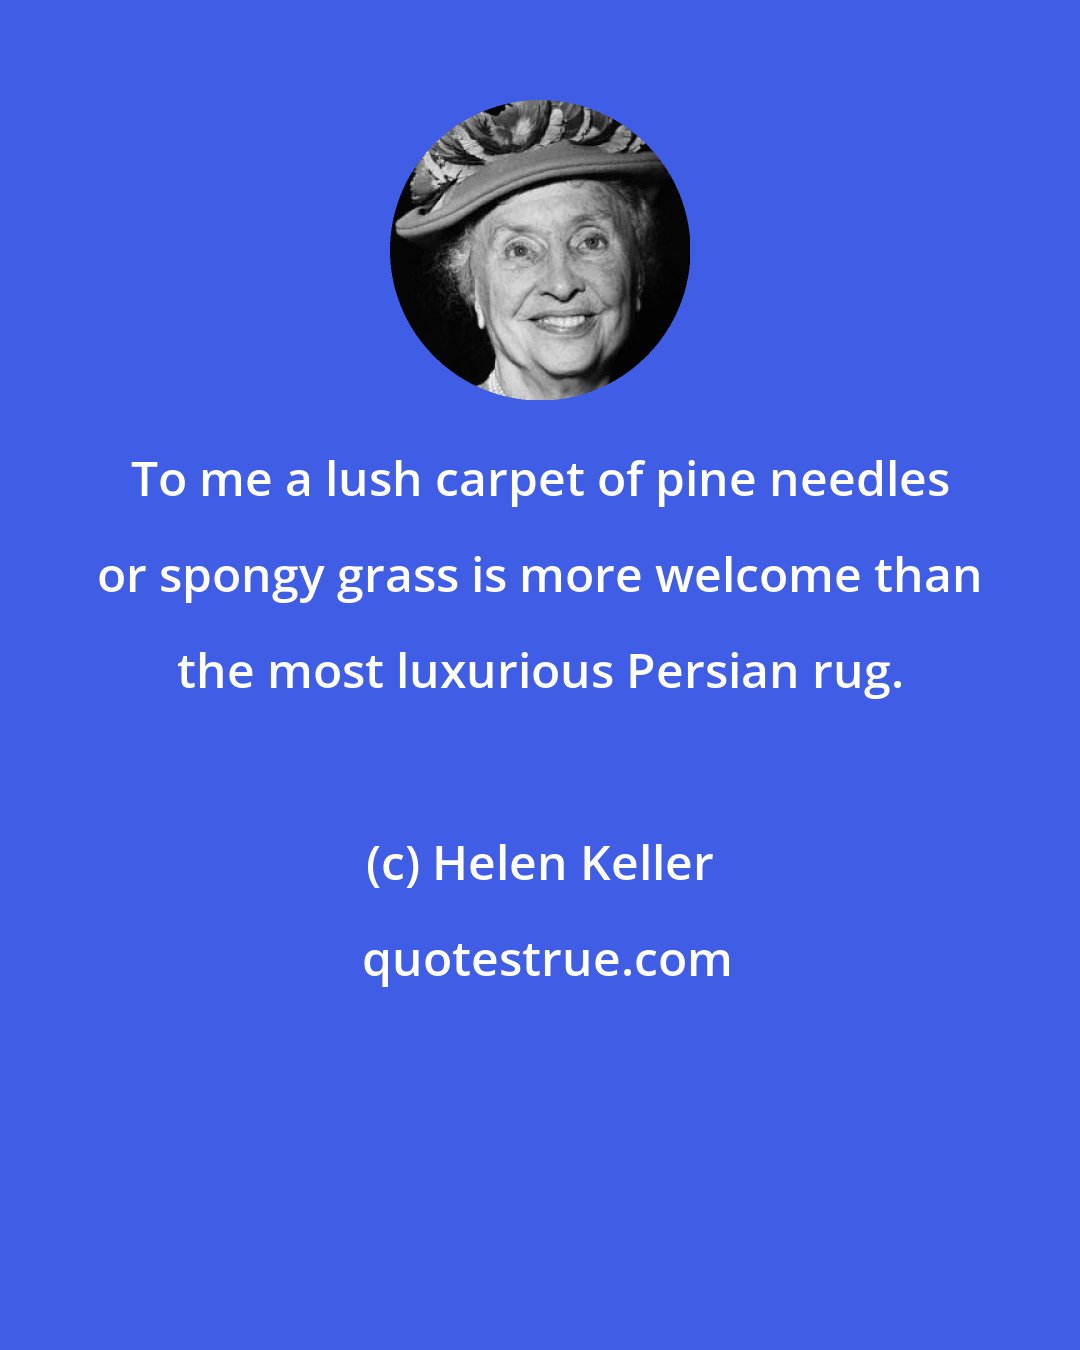 Helen Keller: To me a lush carpet of pine needles or spongy grass is more welcome than the most luxurious Persian rug.